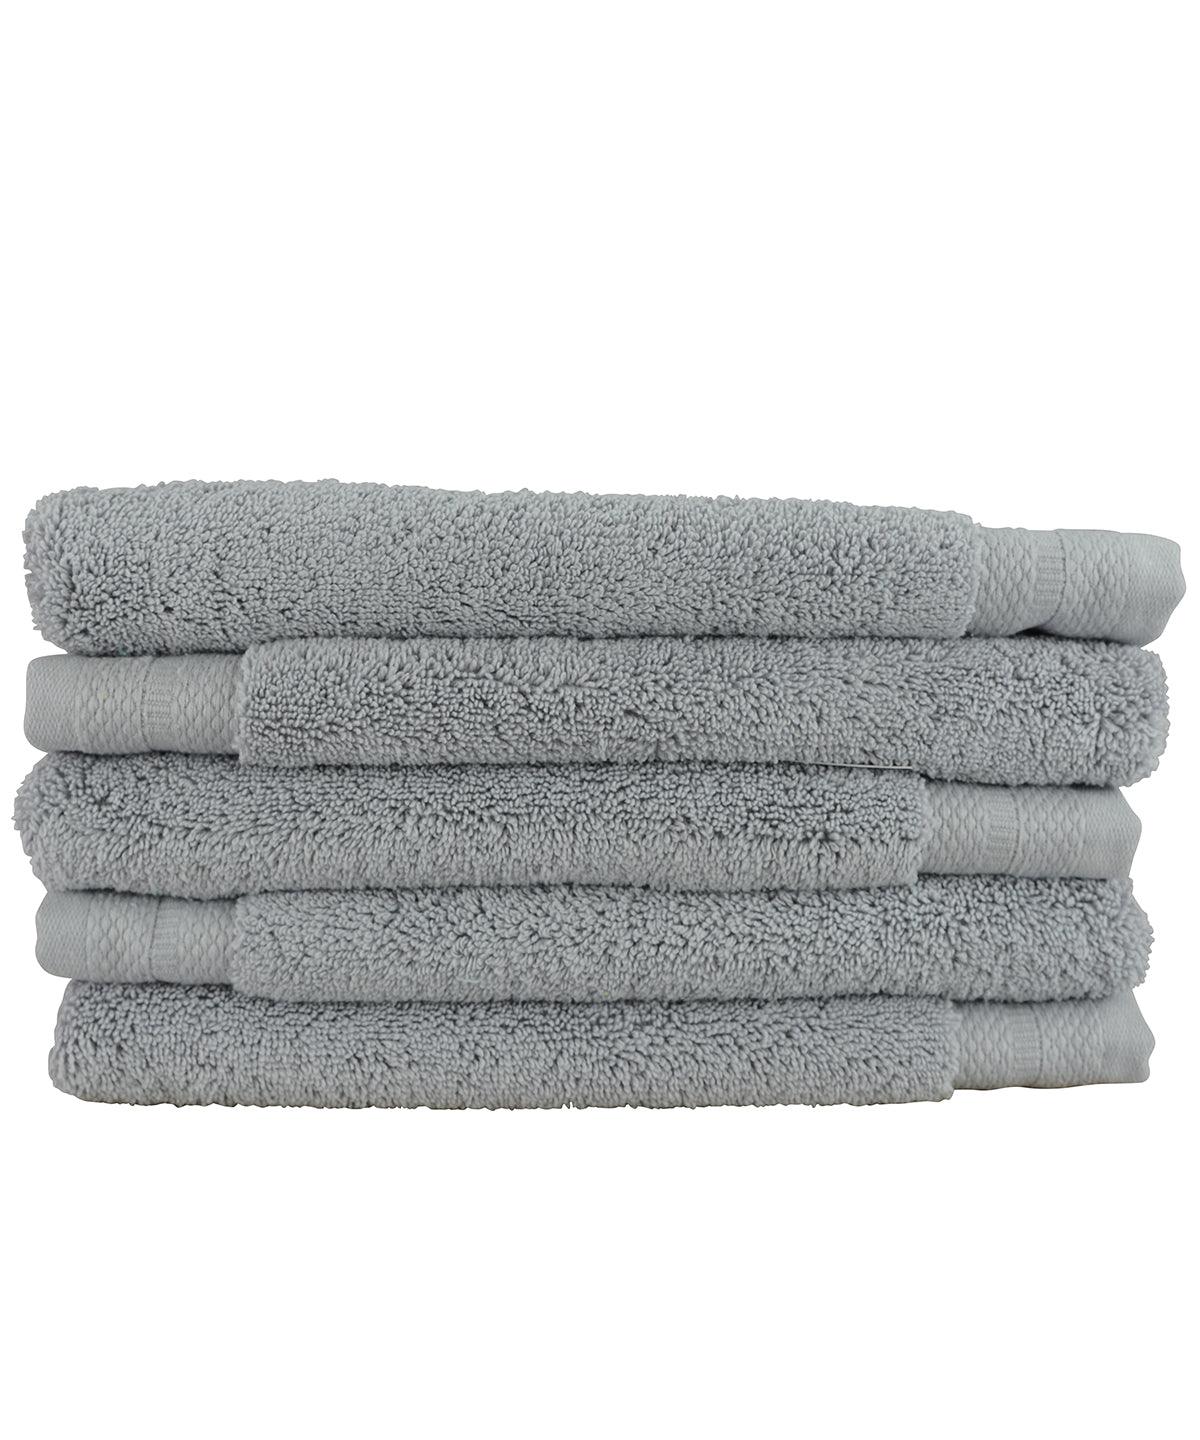 Pure Grey - ARTG® Pure luxe guest towel Towels A&R Towels Gifting & Accessories, Homewares & Towelling Schoolwear Centres